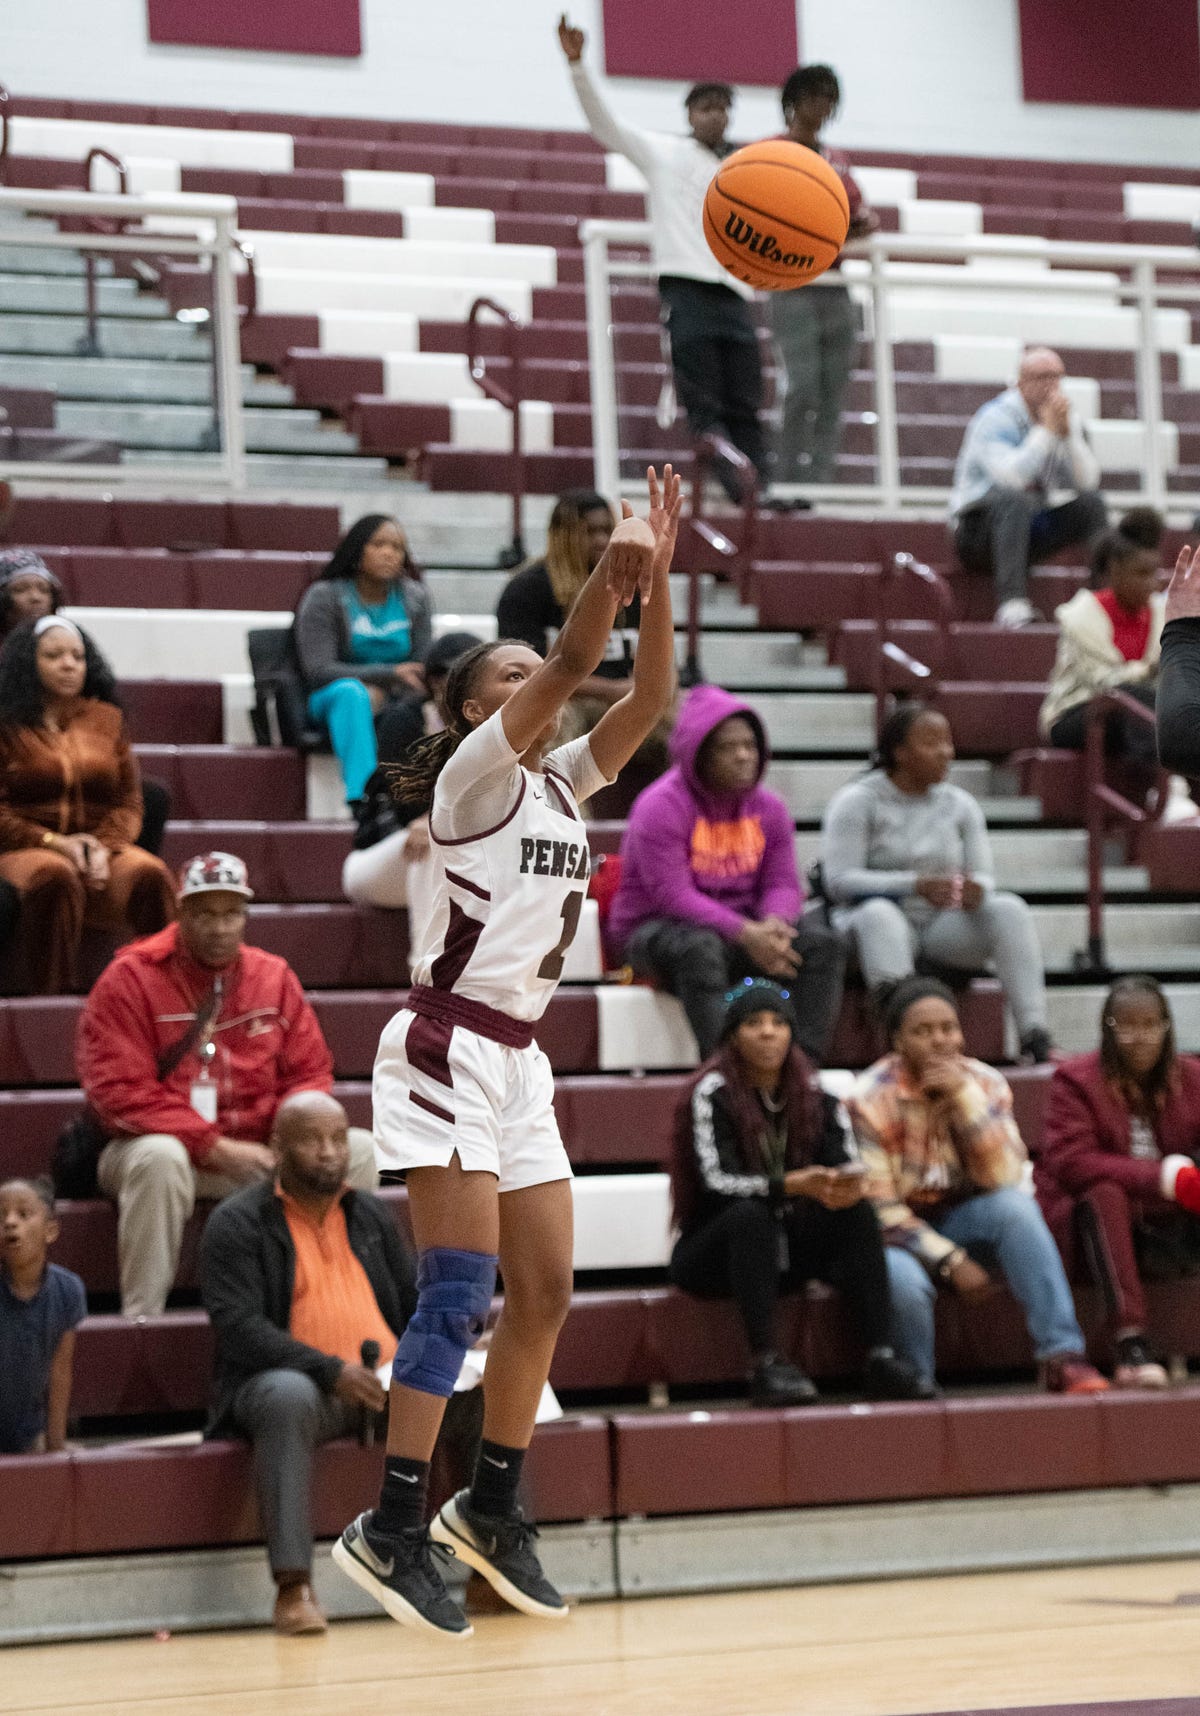 High School Sports Roundup: Pensacola Girls Basketball Team Wins District Championship, Niceville and Munroe Secure Titles, Gulf Breeze Dominates Wrestling and Tennis